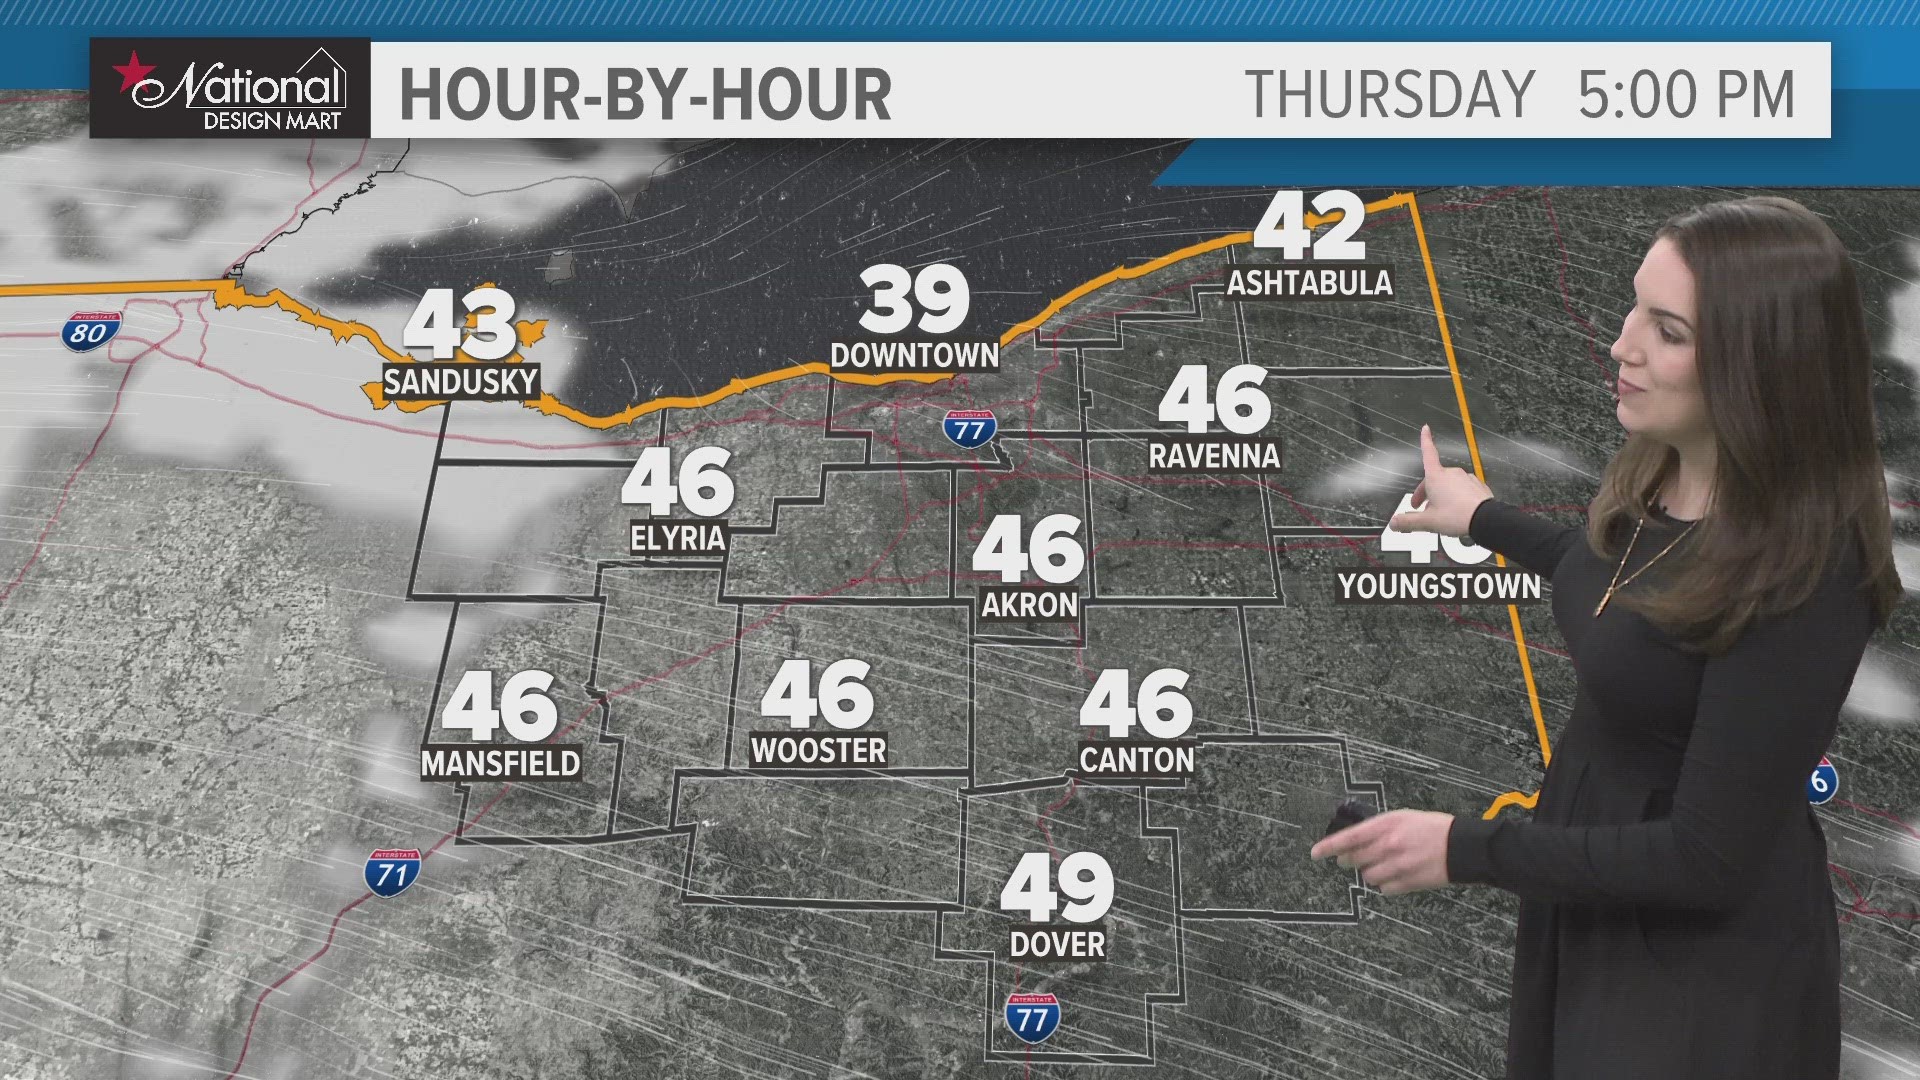 We have sunshine for today with temperatures around 50 degrees. Jessica Van Meter has the hour-by-hour details in her morning weather forecast for March 28, 2024.